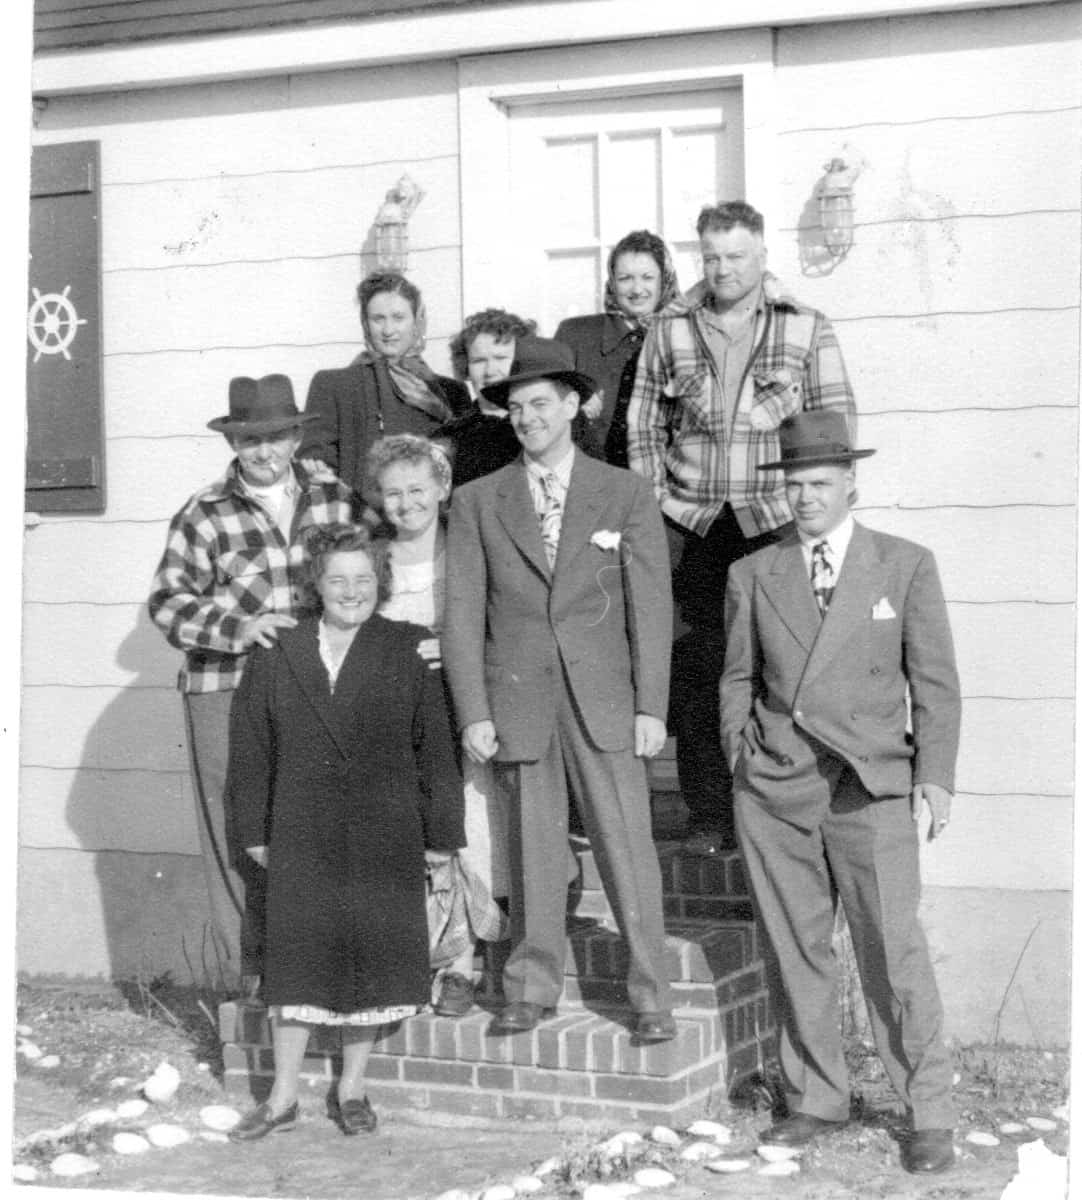 A photo from the 1940's in North Beach Haven. An interesting mix of Flannel shirts and suits for the guys.